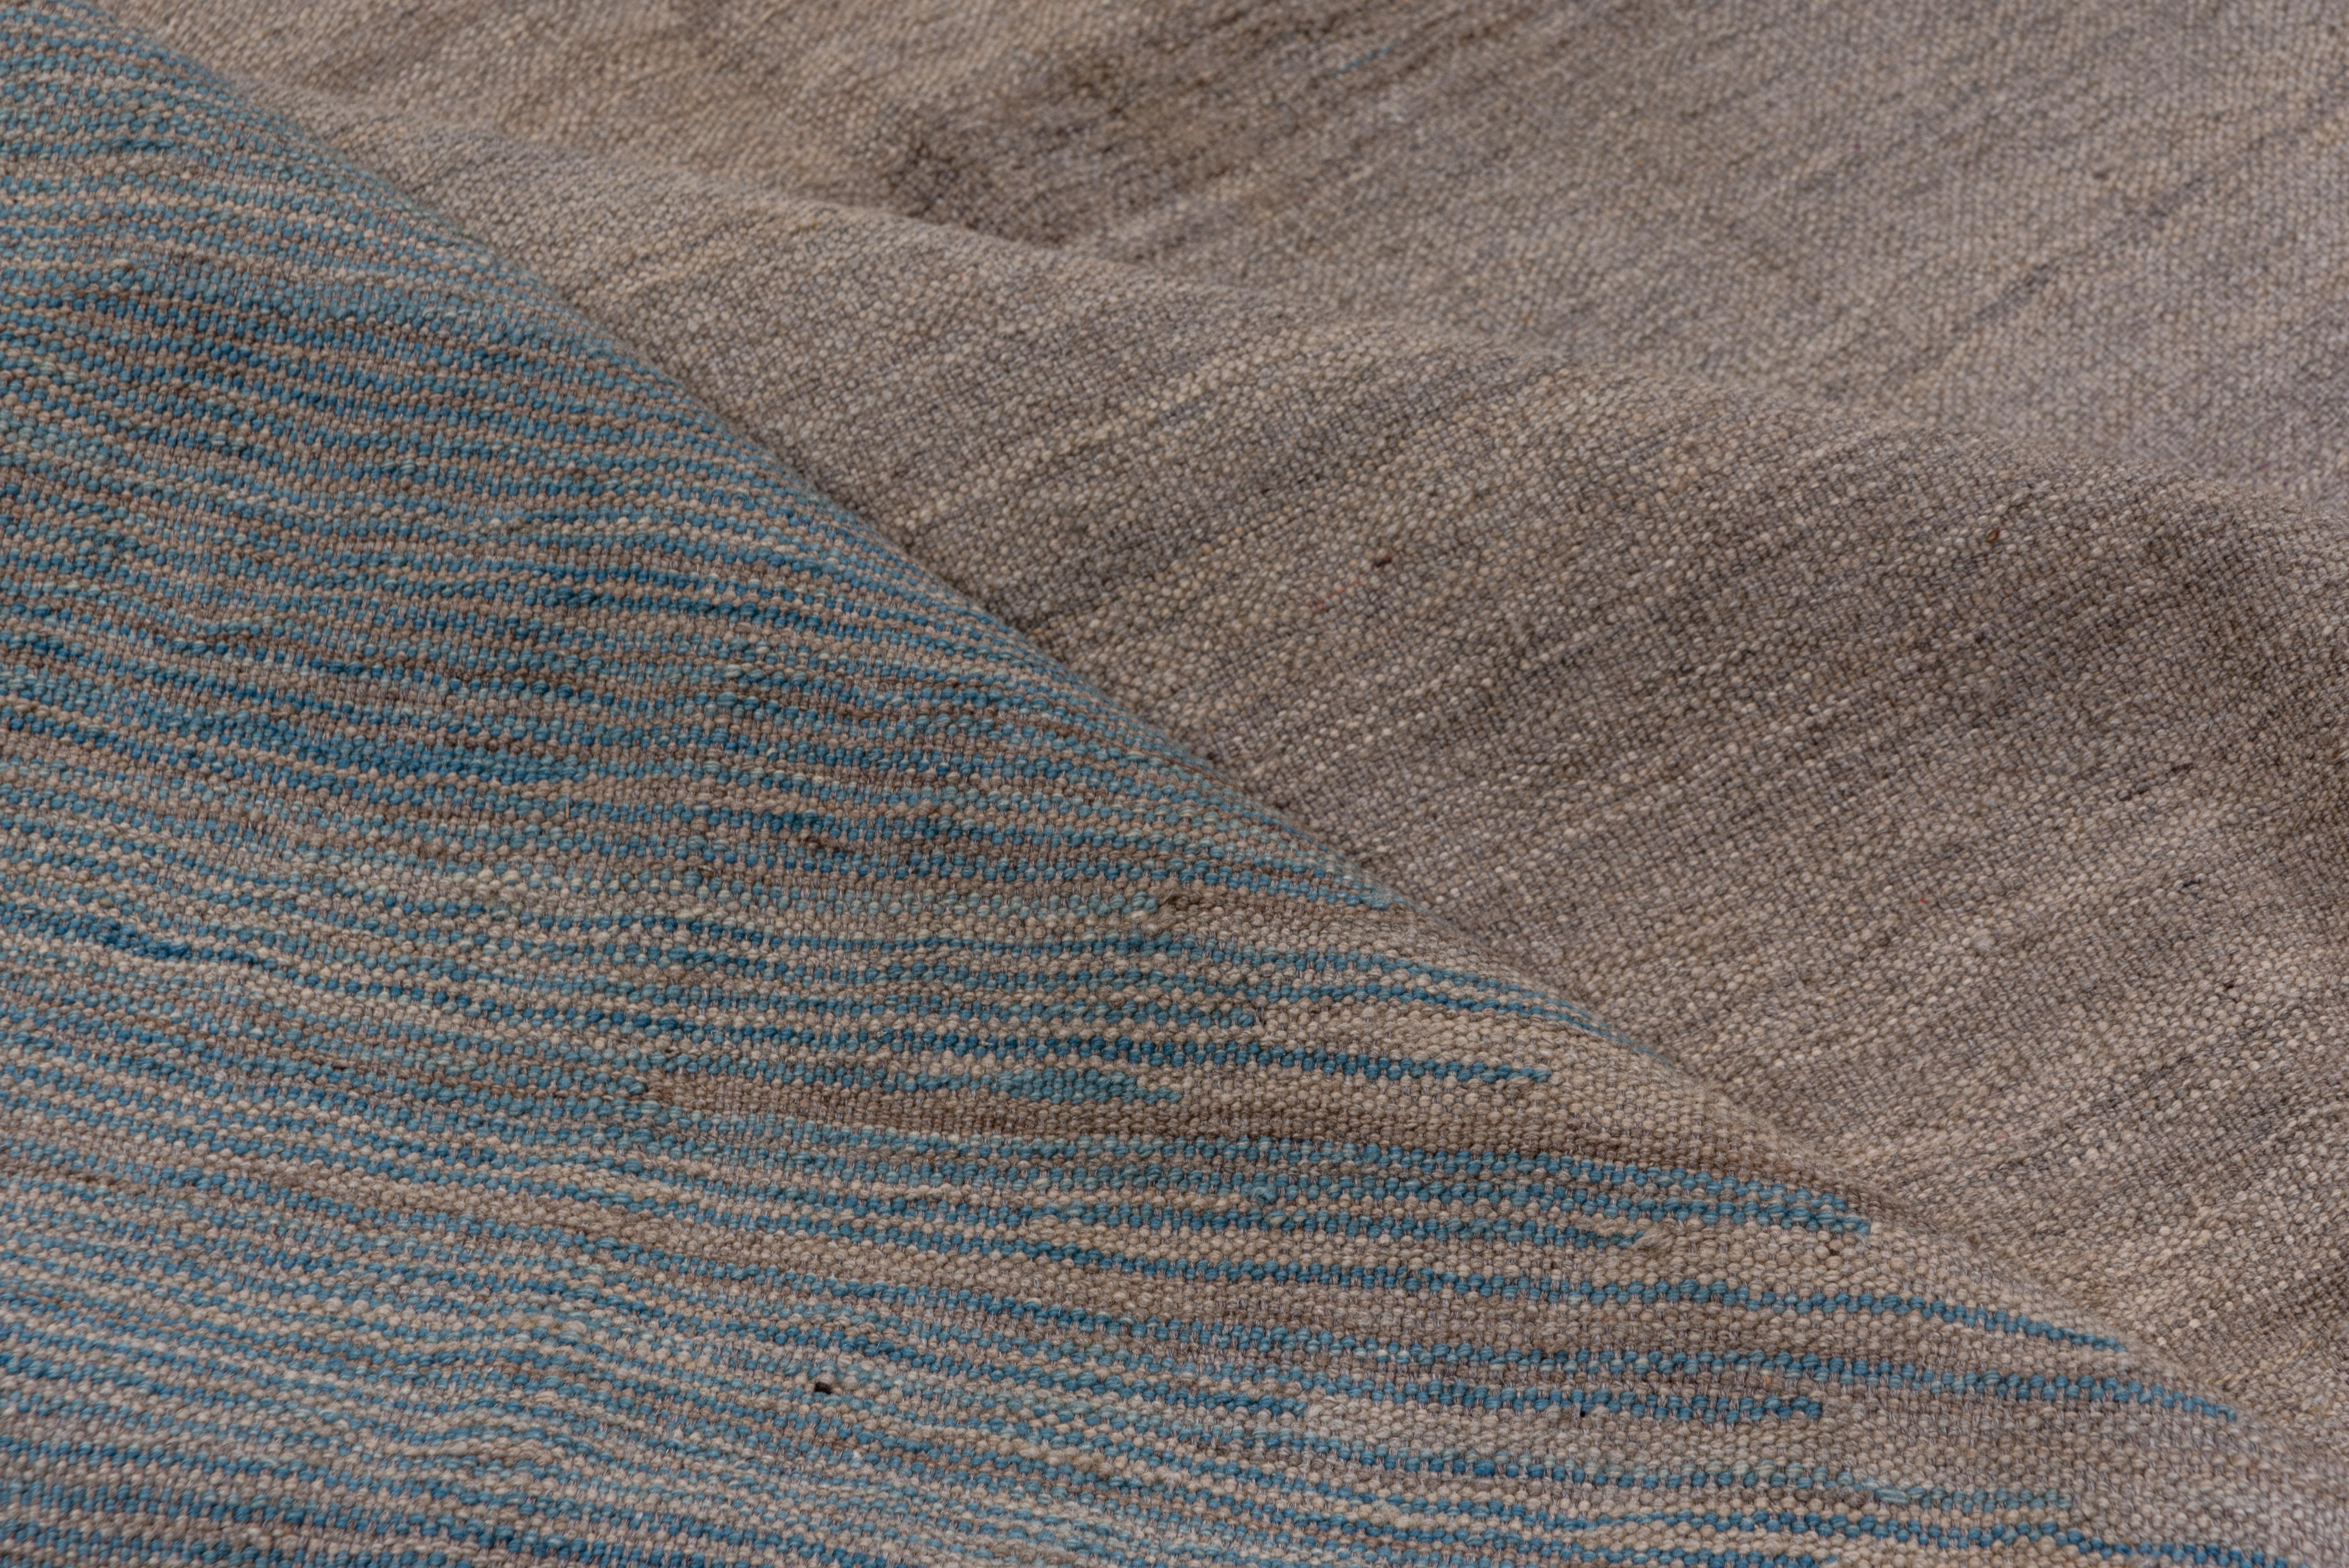 Wool Modern & Contemporary Handwoven Flatweave Rug, Light Blue & Brown & Gray Palette For Sale